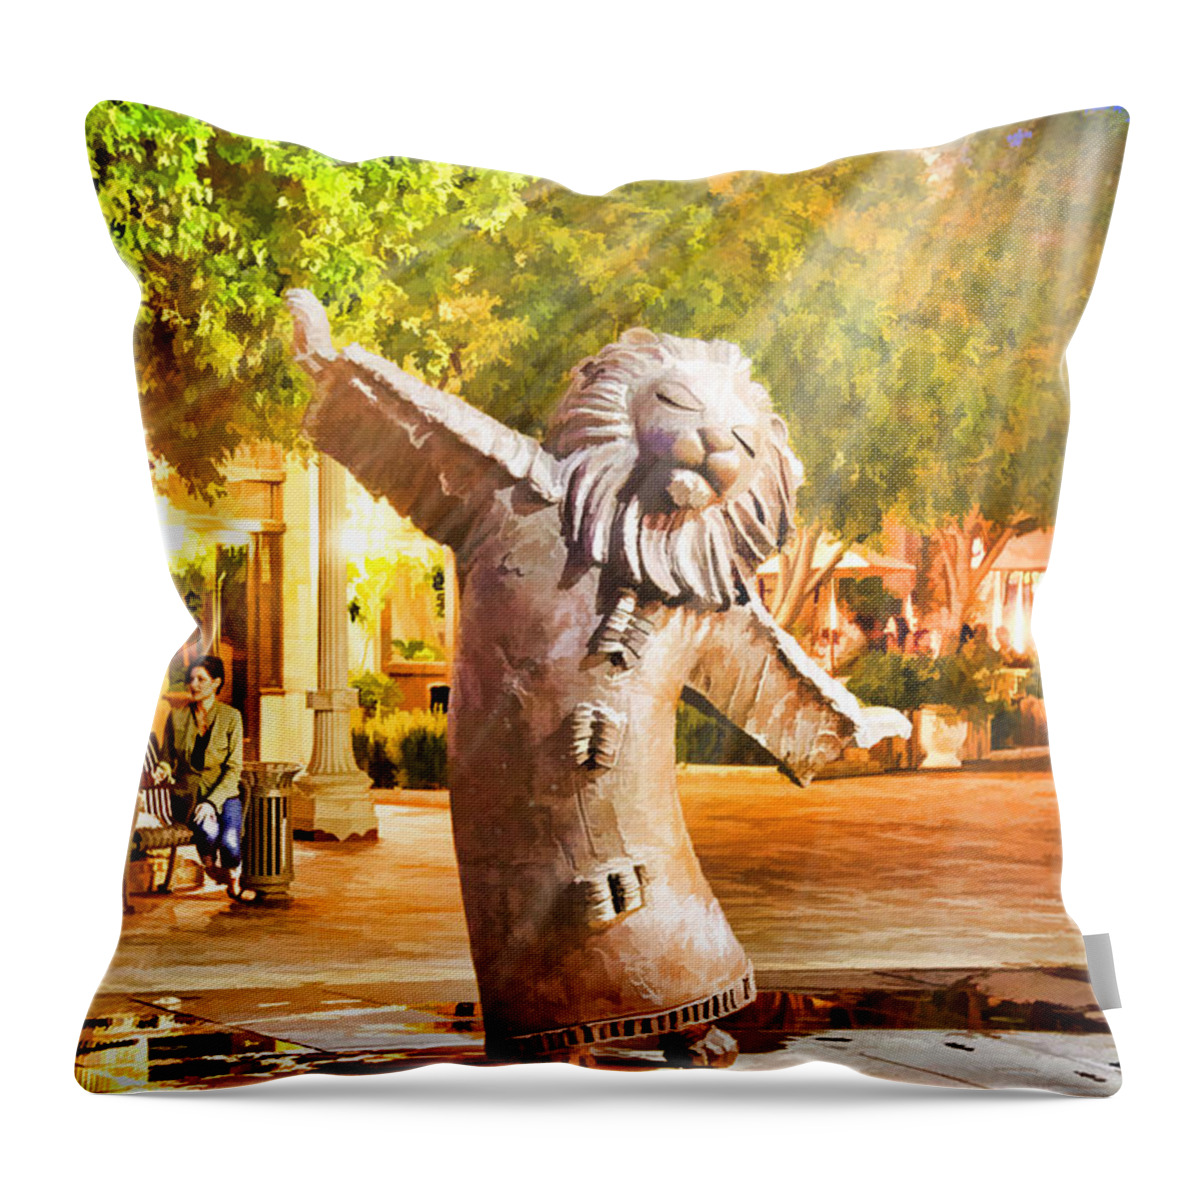 Staley Throw Pillow featuring the photograph Lion Fountain by Chuck Staley